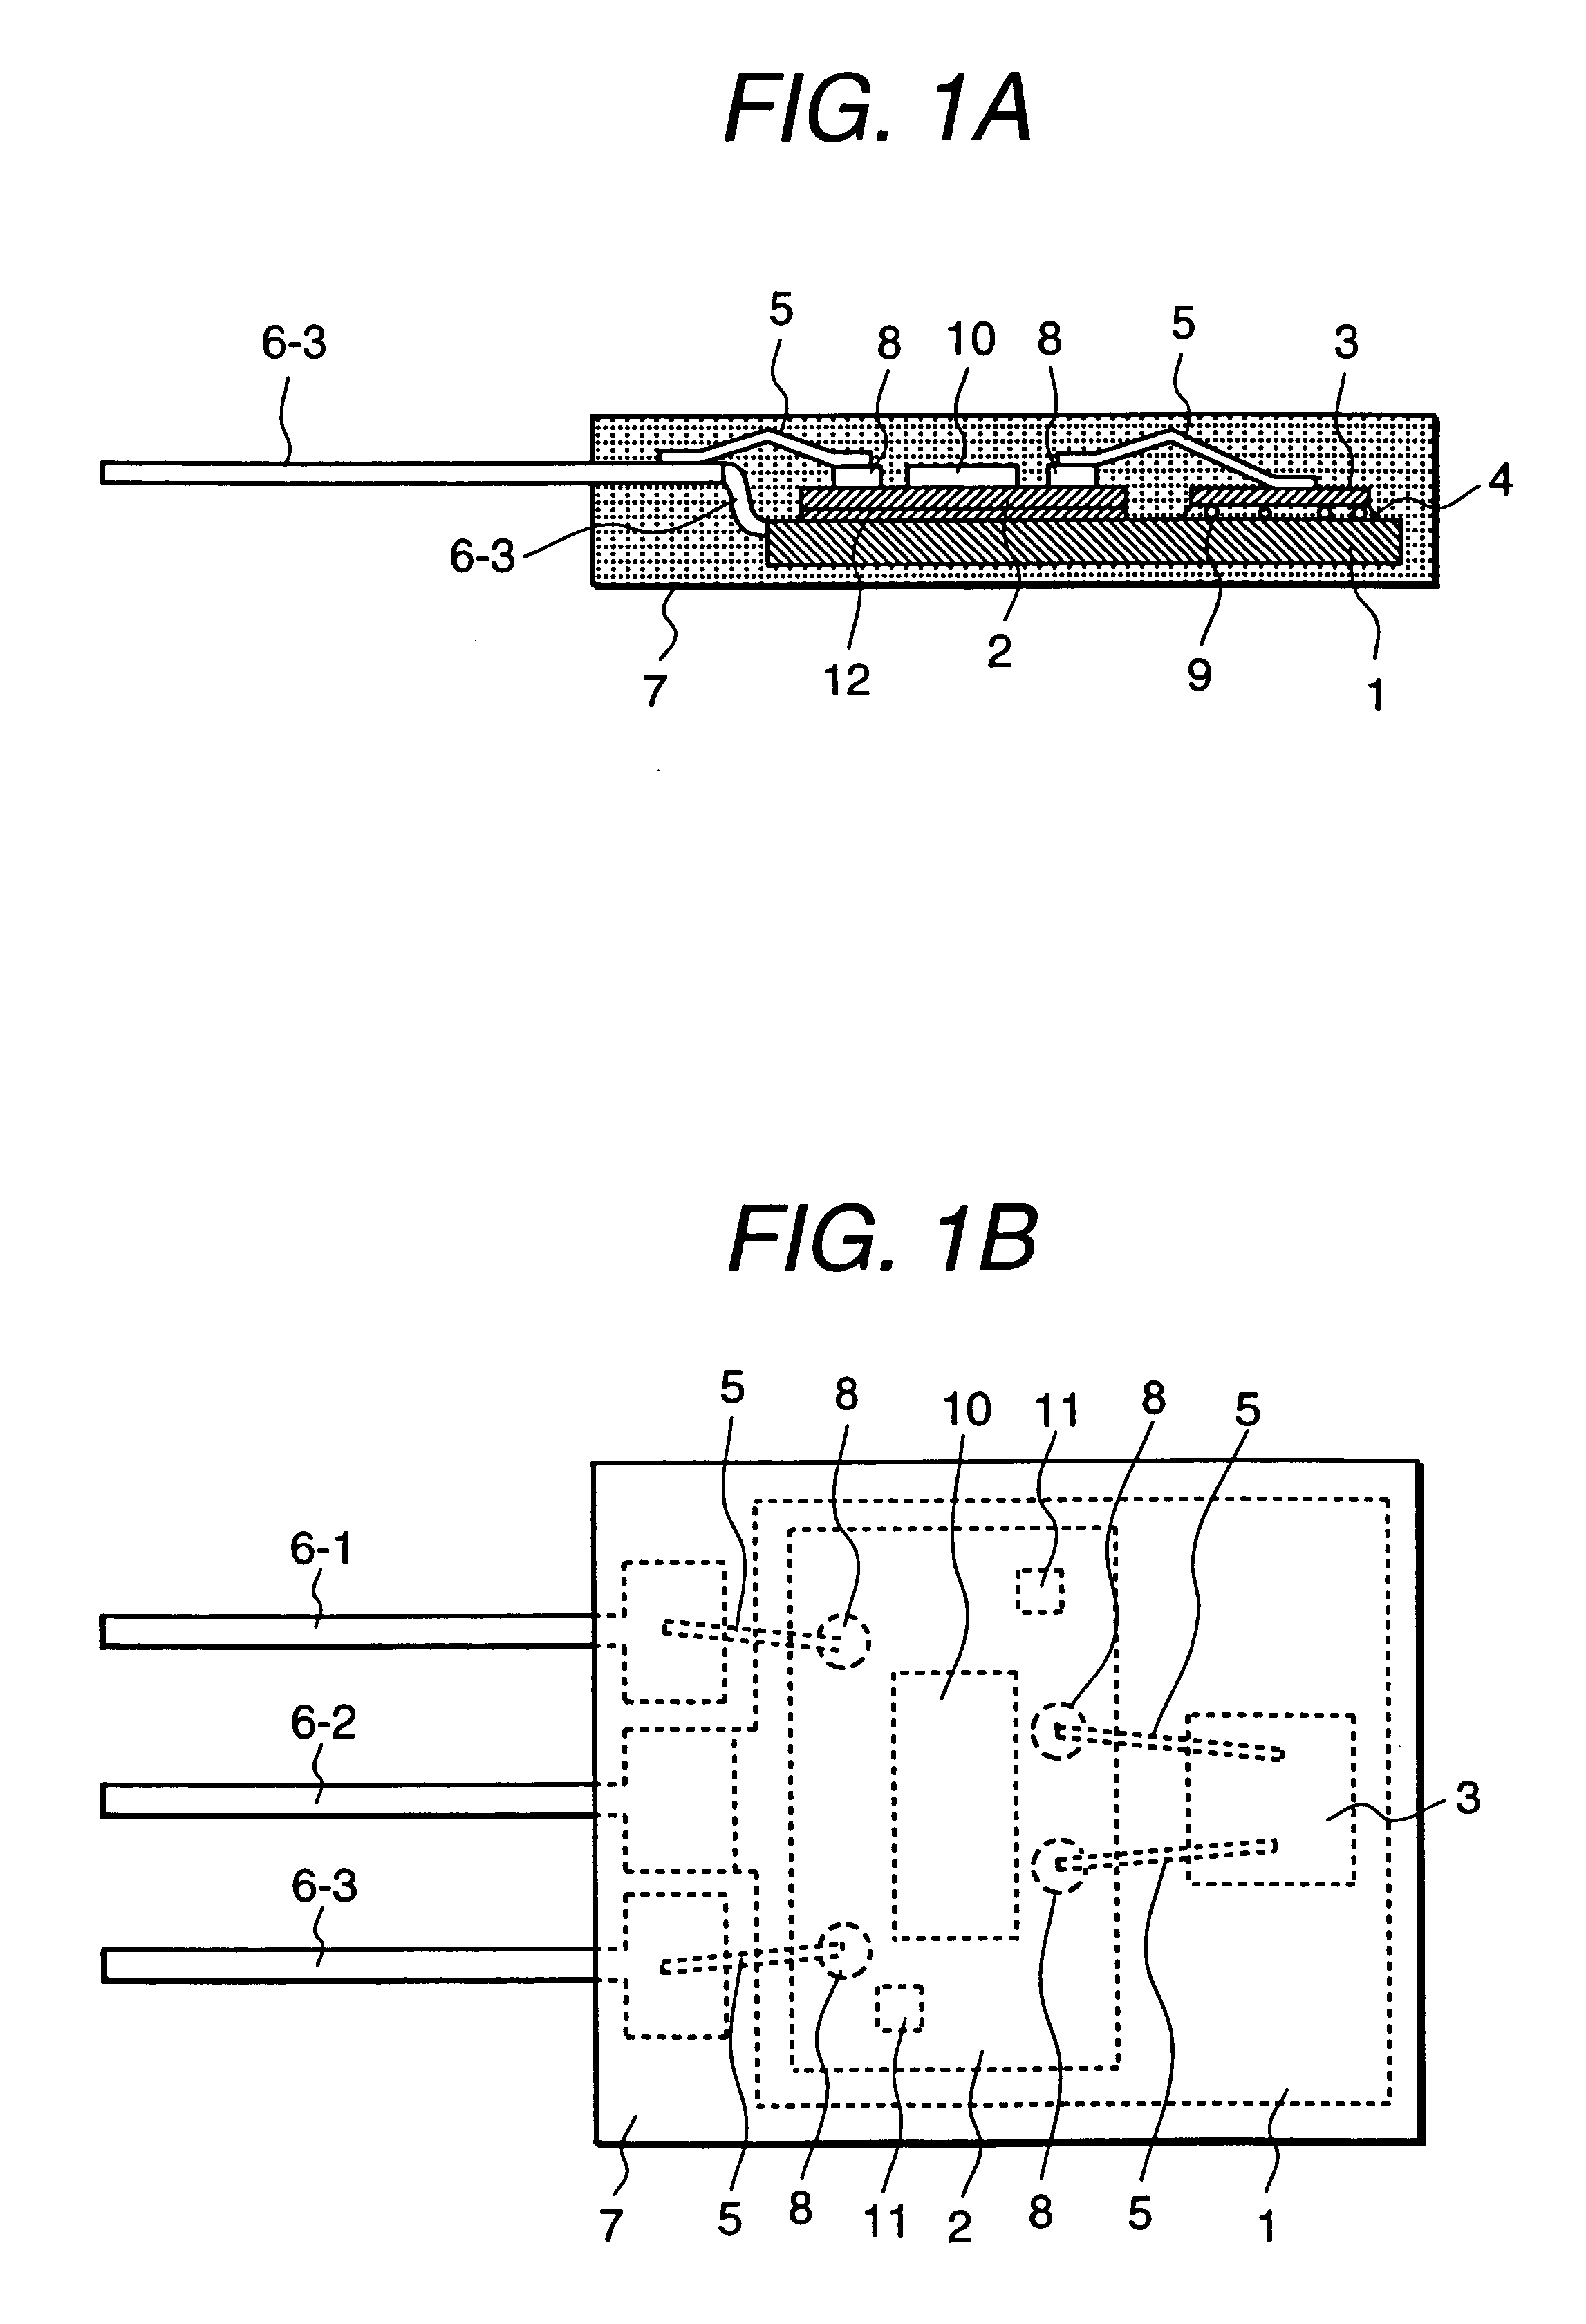 Resin-sealed electronic apparatus for use in internal combustion engines